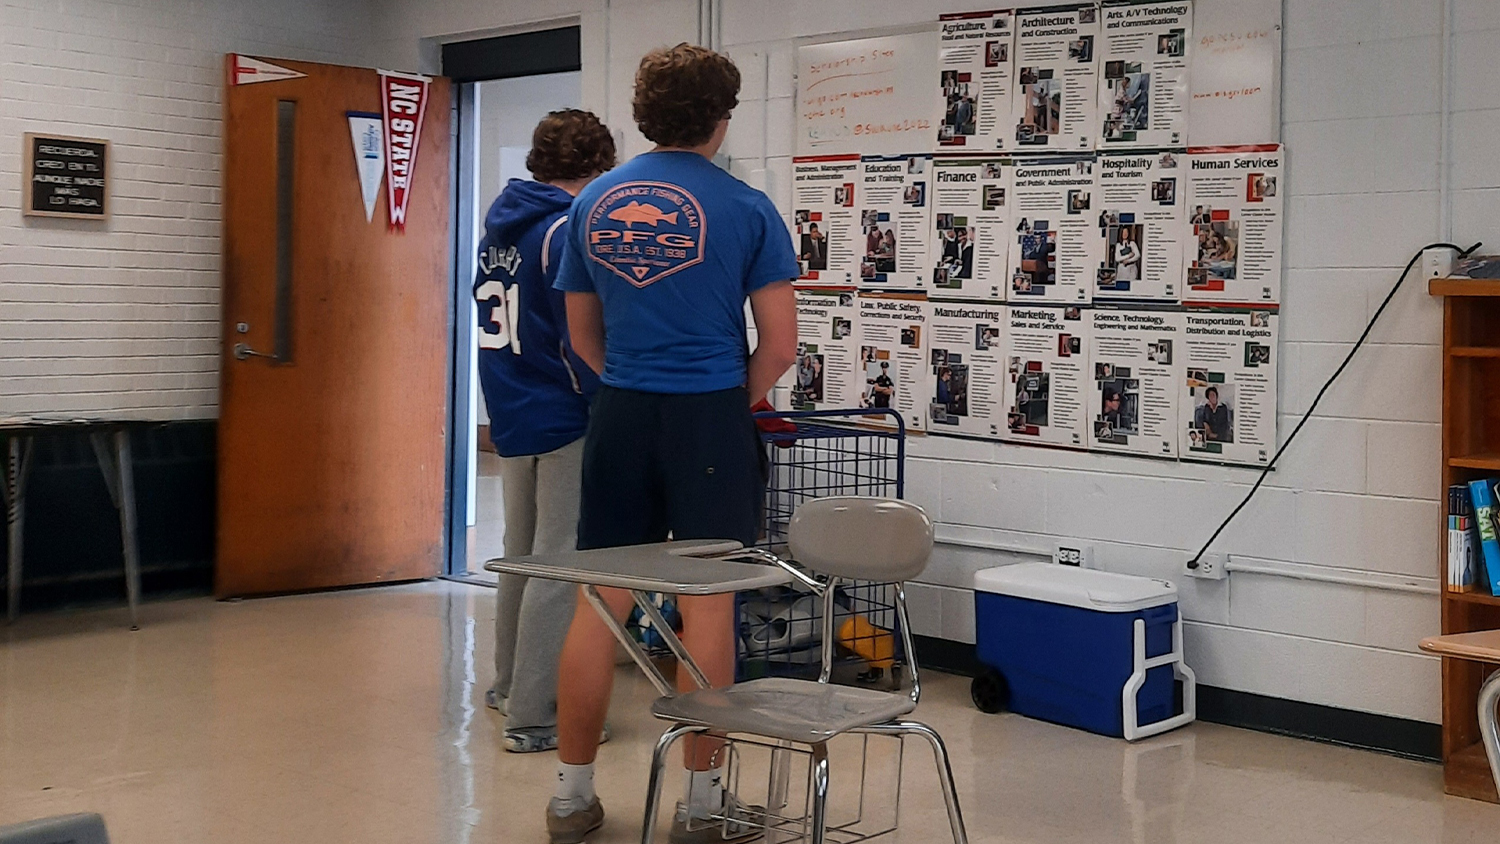 Two students look at a bulletin board in a classroom